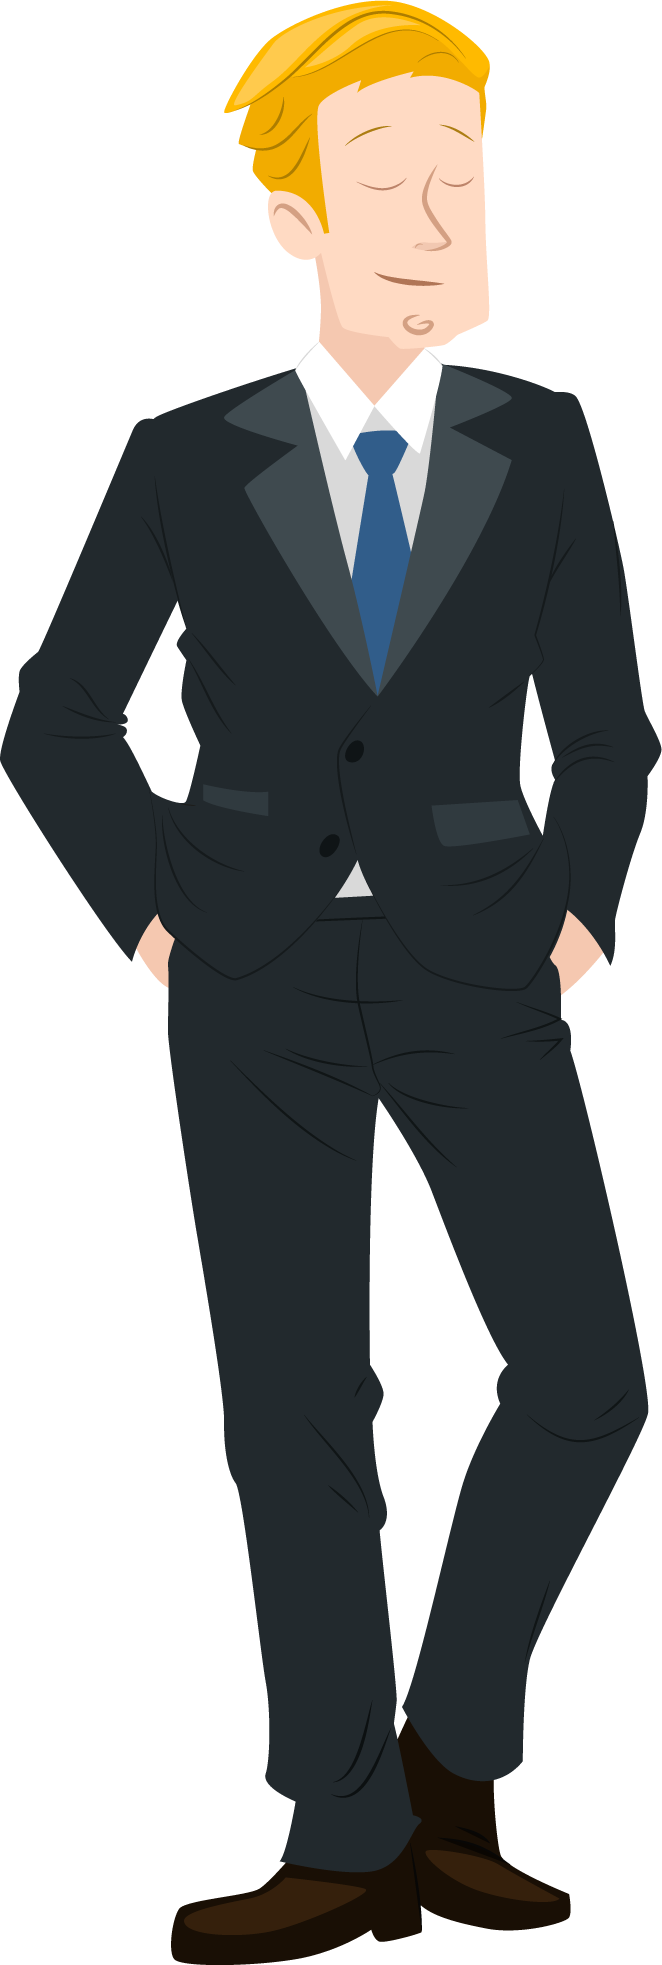 Men in suits clipart clipart images gallery for free.